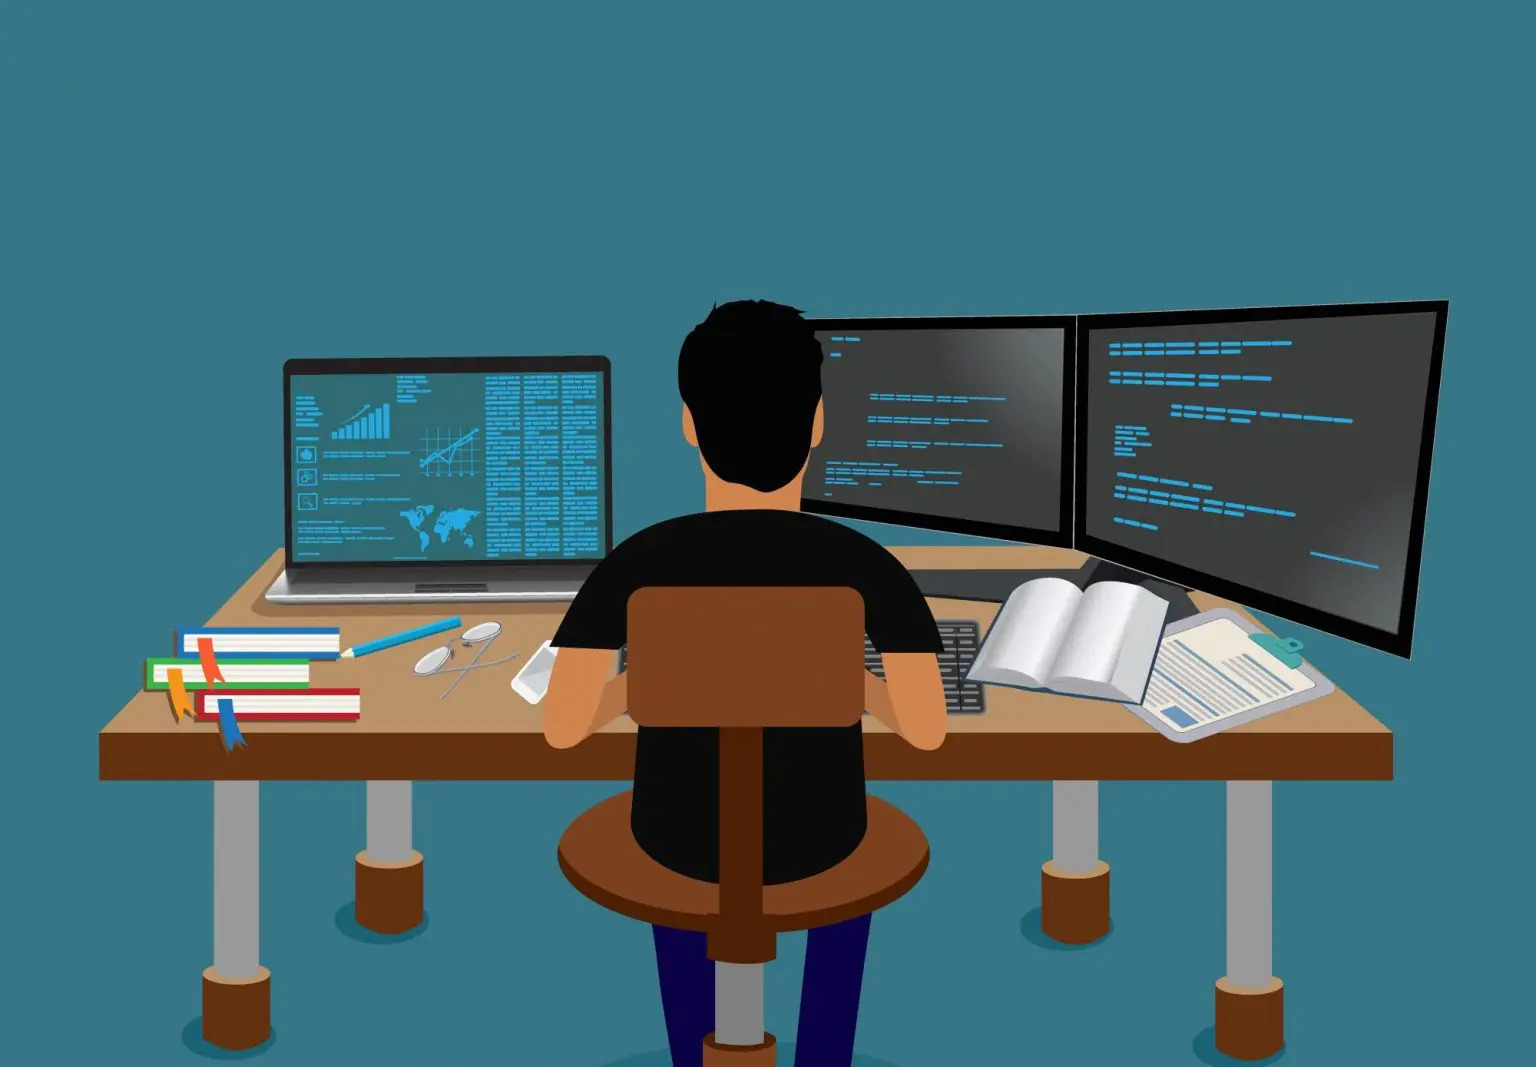 Cartoon person sitting at a desk working at a computer